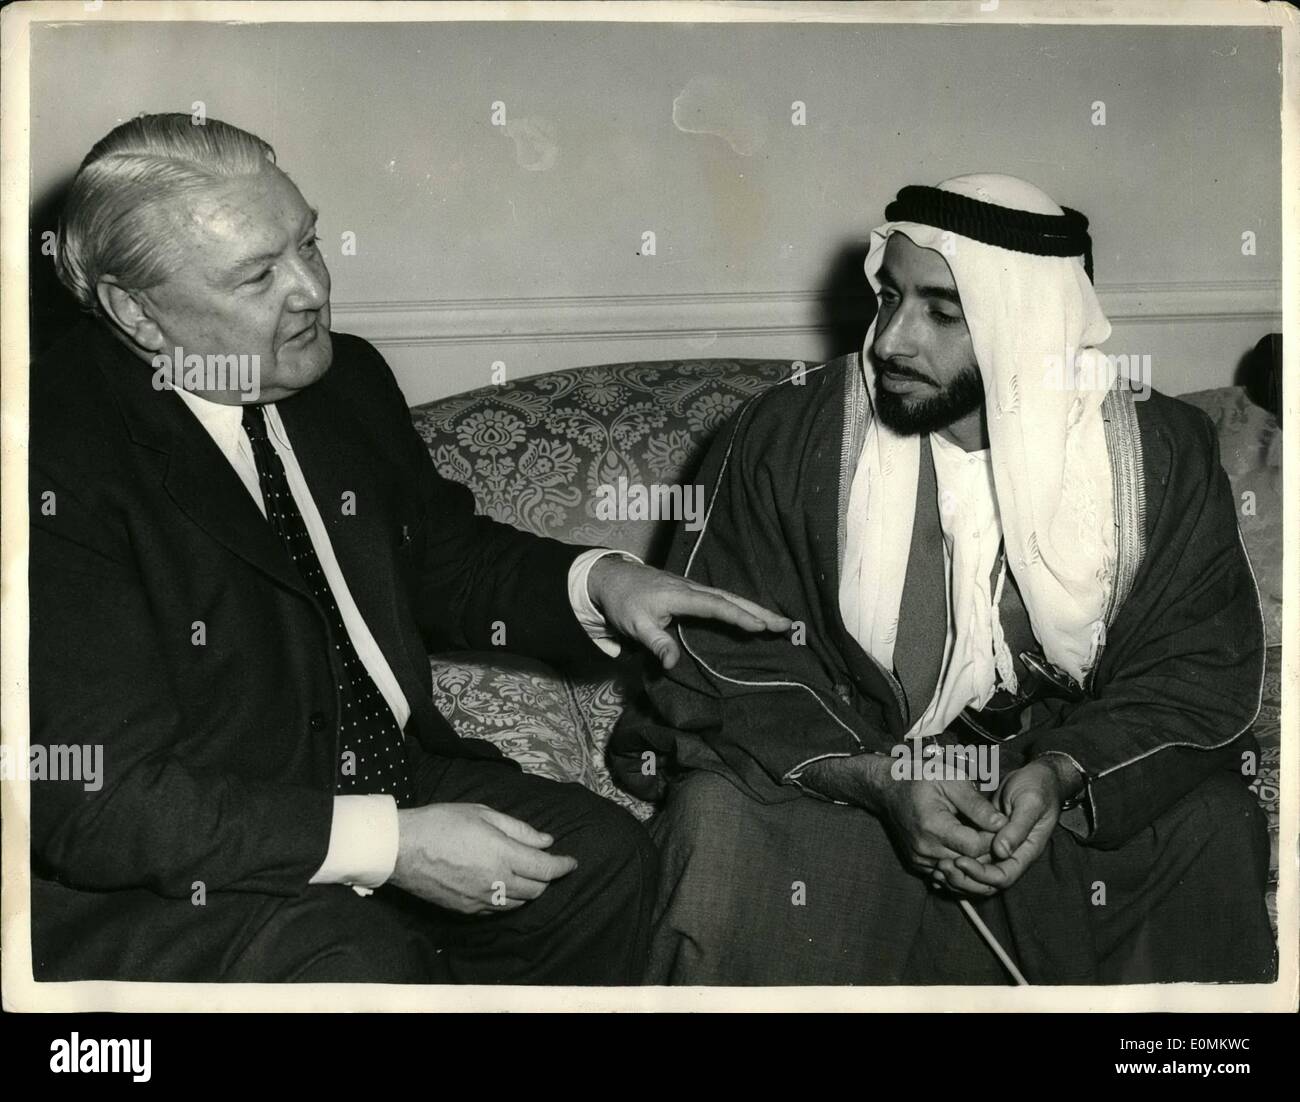 Oct. 10, 1955 - Sheikh who rejected &pound;30,000,000 Bribe, on first visit to London.: Paying his first visit to London is Sheikh Zaid  sultan, ruler of the oil-rich territory of Bmi, near the Persian Gulf. Sheikh Zaid is the main who turned down a Bribe of &pound;30,000,000 form King Ibn Saud to rob Britain of vast oil interests around Buraimi and hand them over to Saudi Arabia and American oil companies. Photo shows Sheikh Zaidi, who is on his first visit to London - seen being interviewed in London last night. Stock Photo